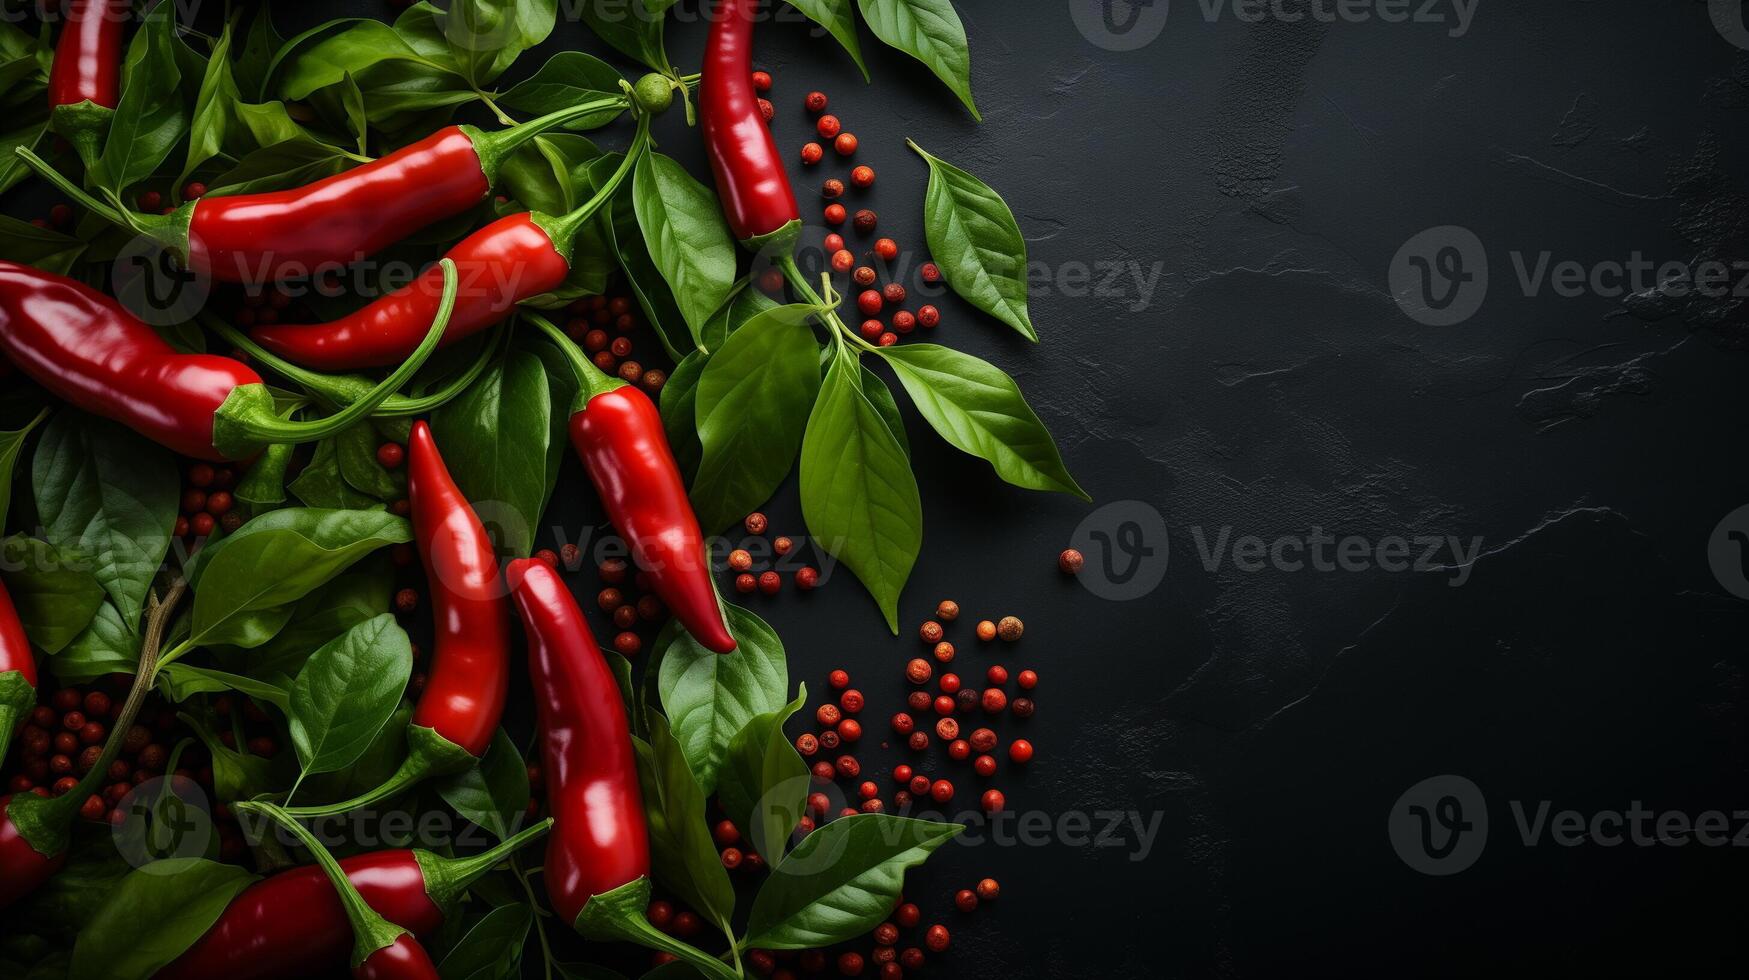 AI generated Top view of red chili peppers, peppercorns, and green basil leaves on a dark textured background. Ingredients for cooking and seasoning concept. Design for spice market advertising photo